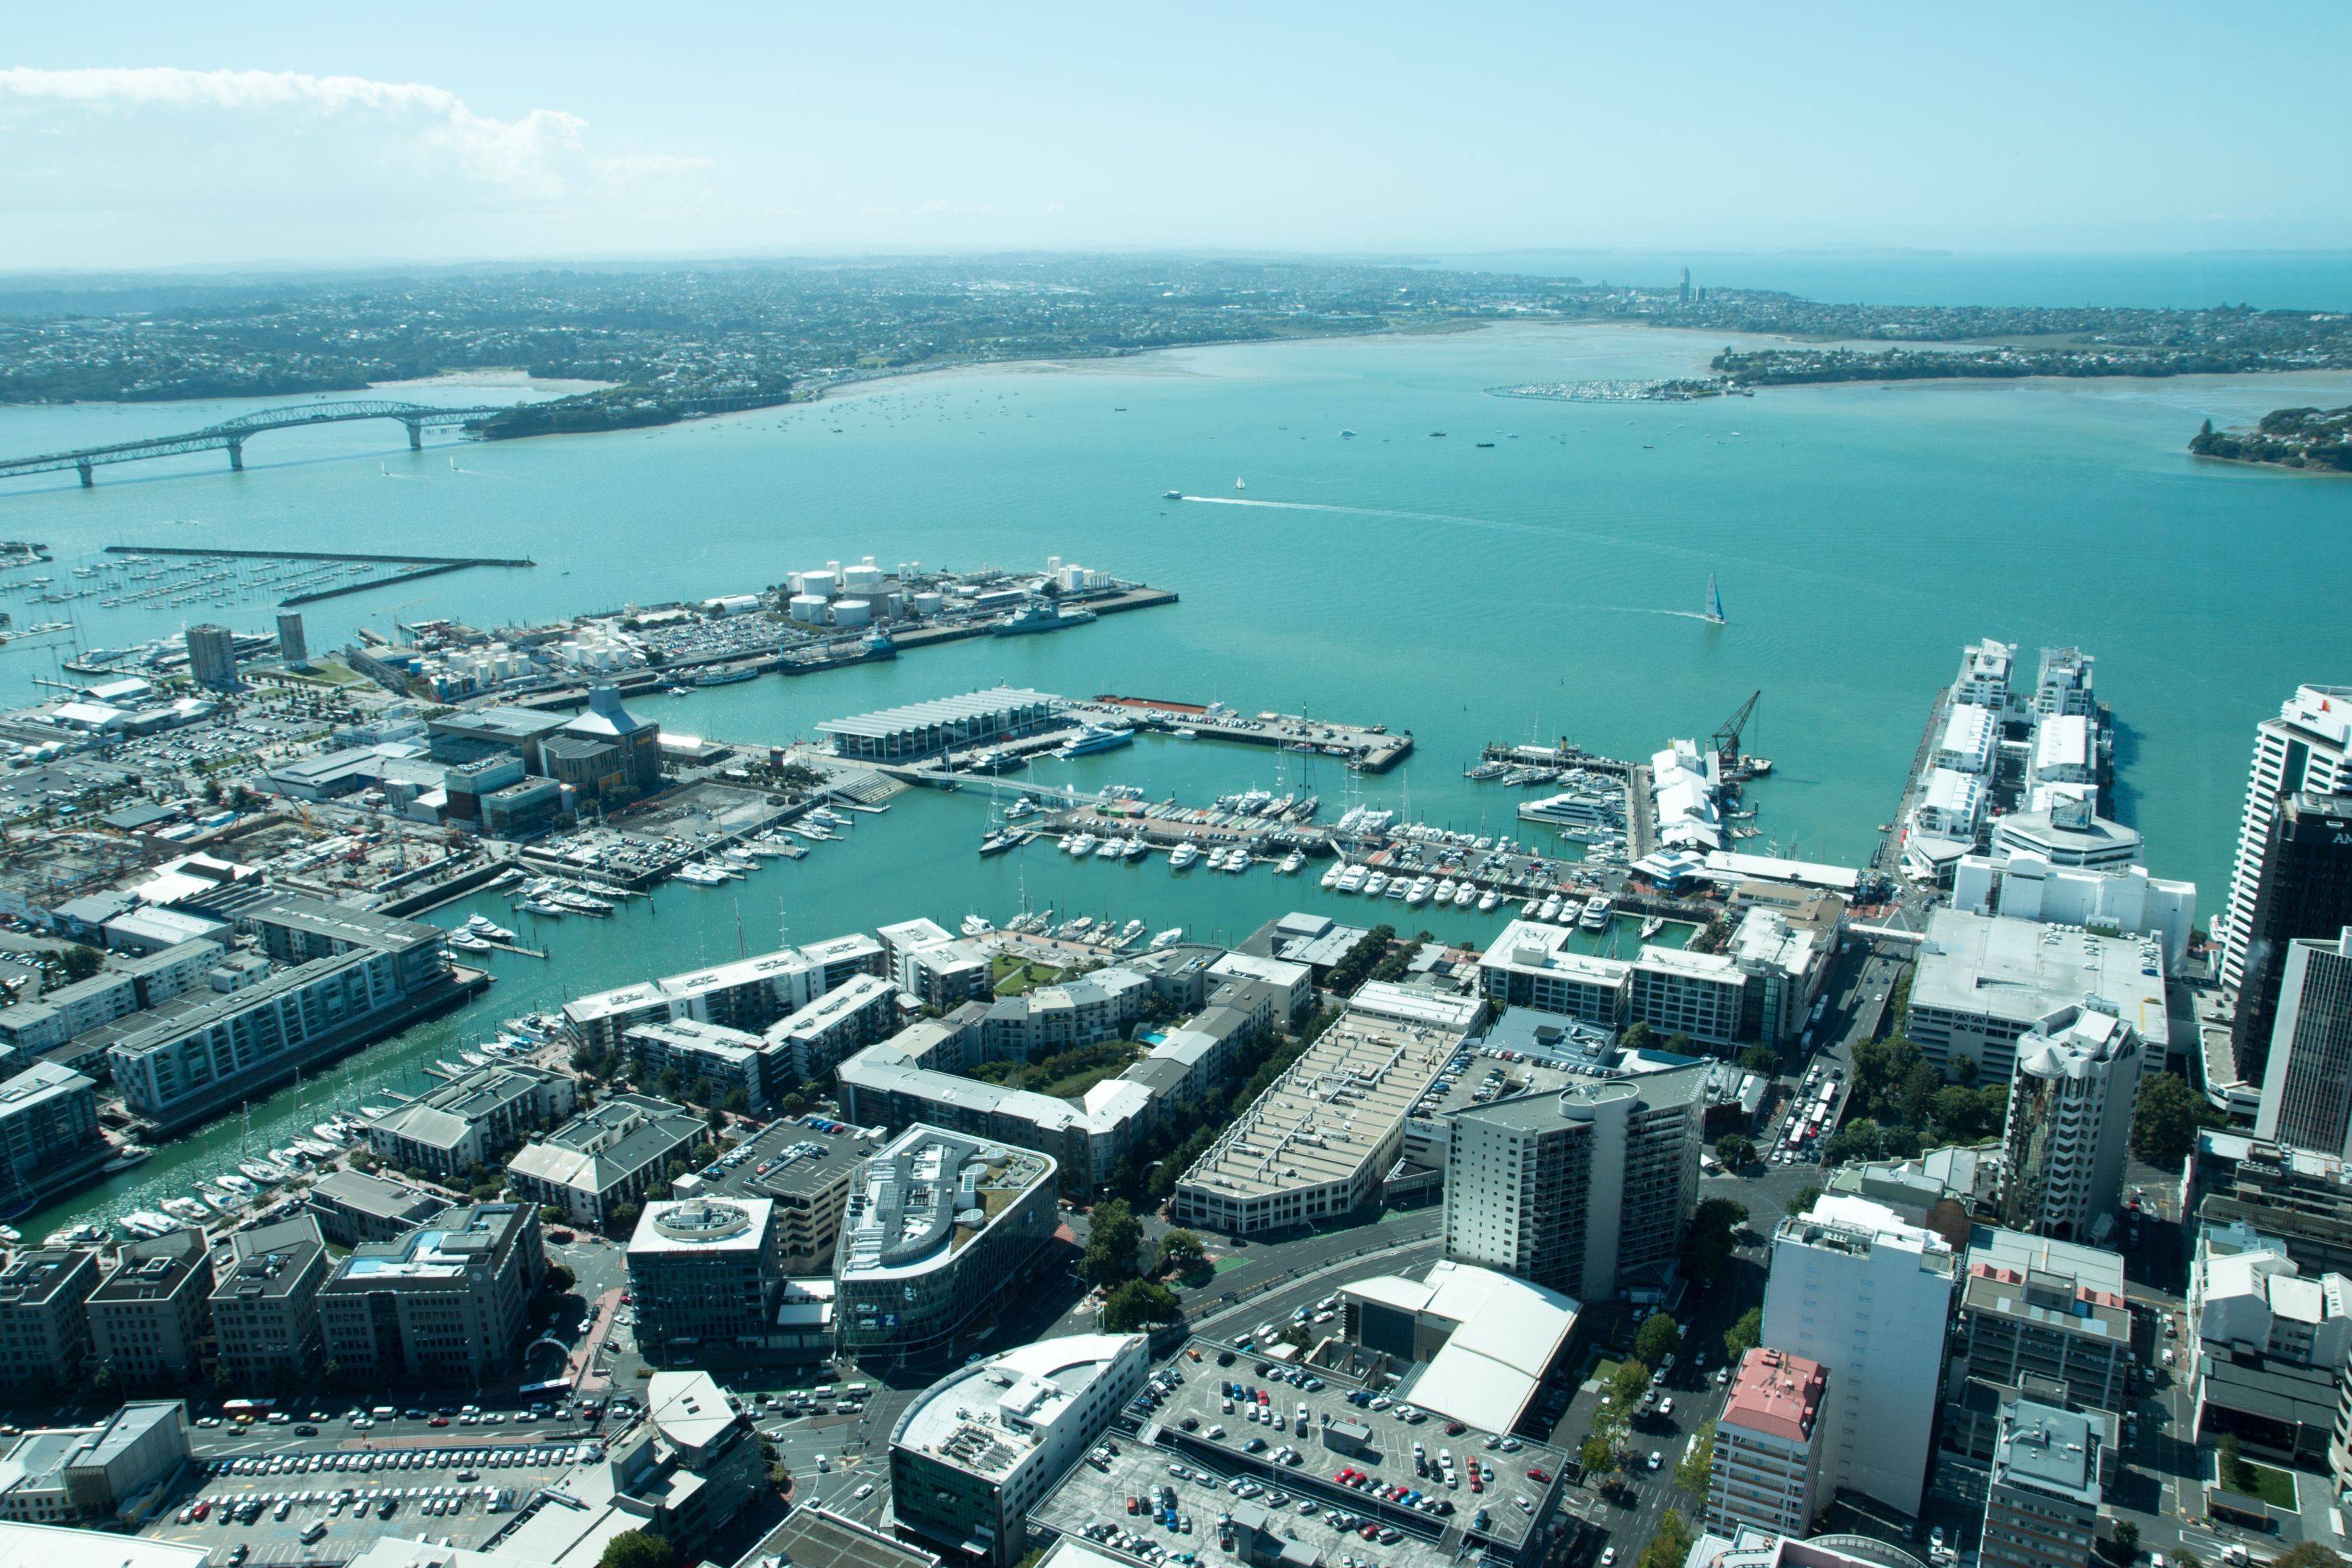 Auckland - "The City of Sails"